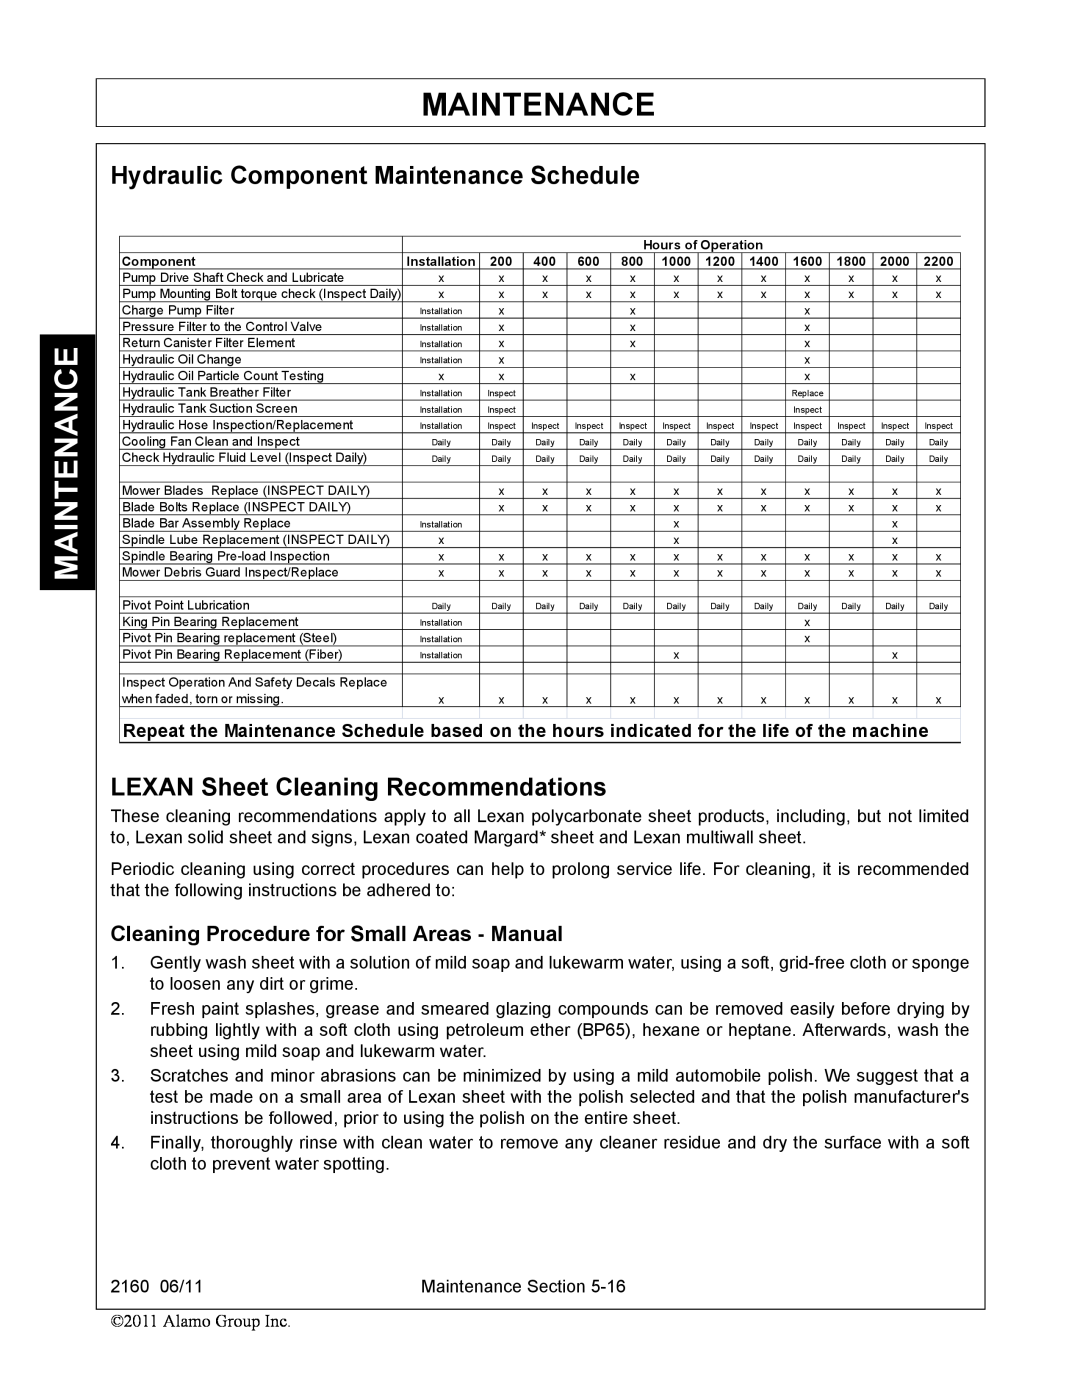 Servis-Rhino 2160 manual Hydraulic Component Maintenance Schedule, LEXAN Sheet Cleaning Recommendations 